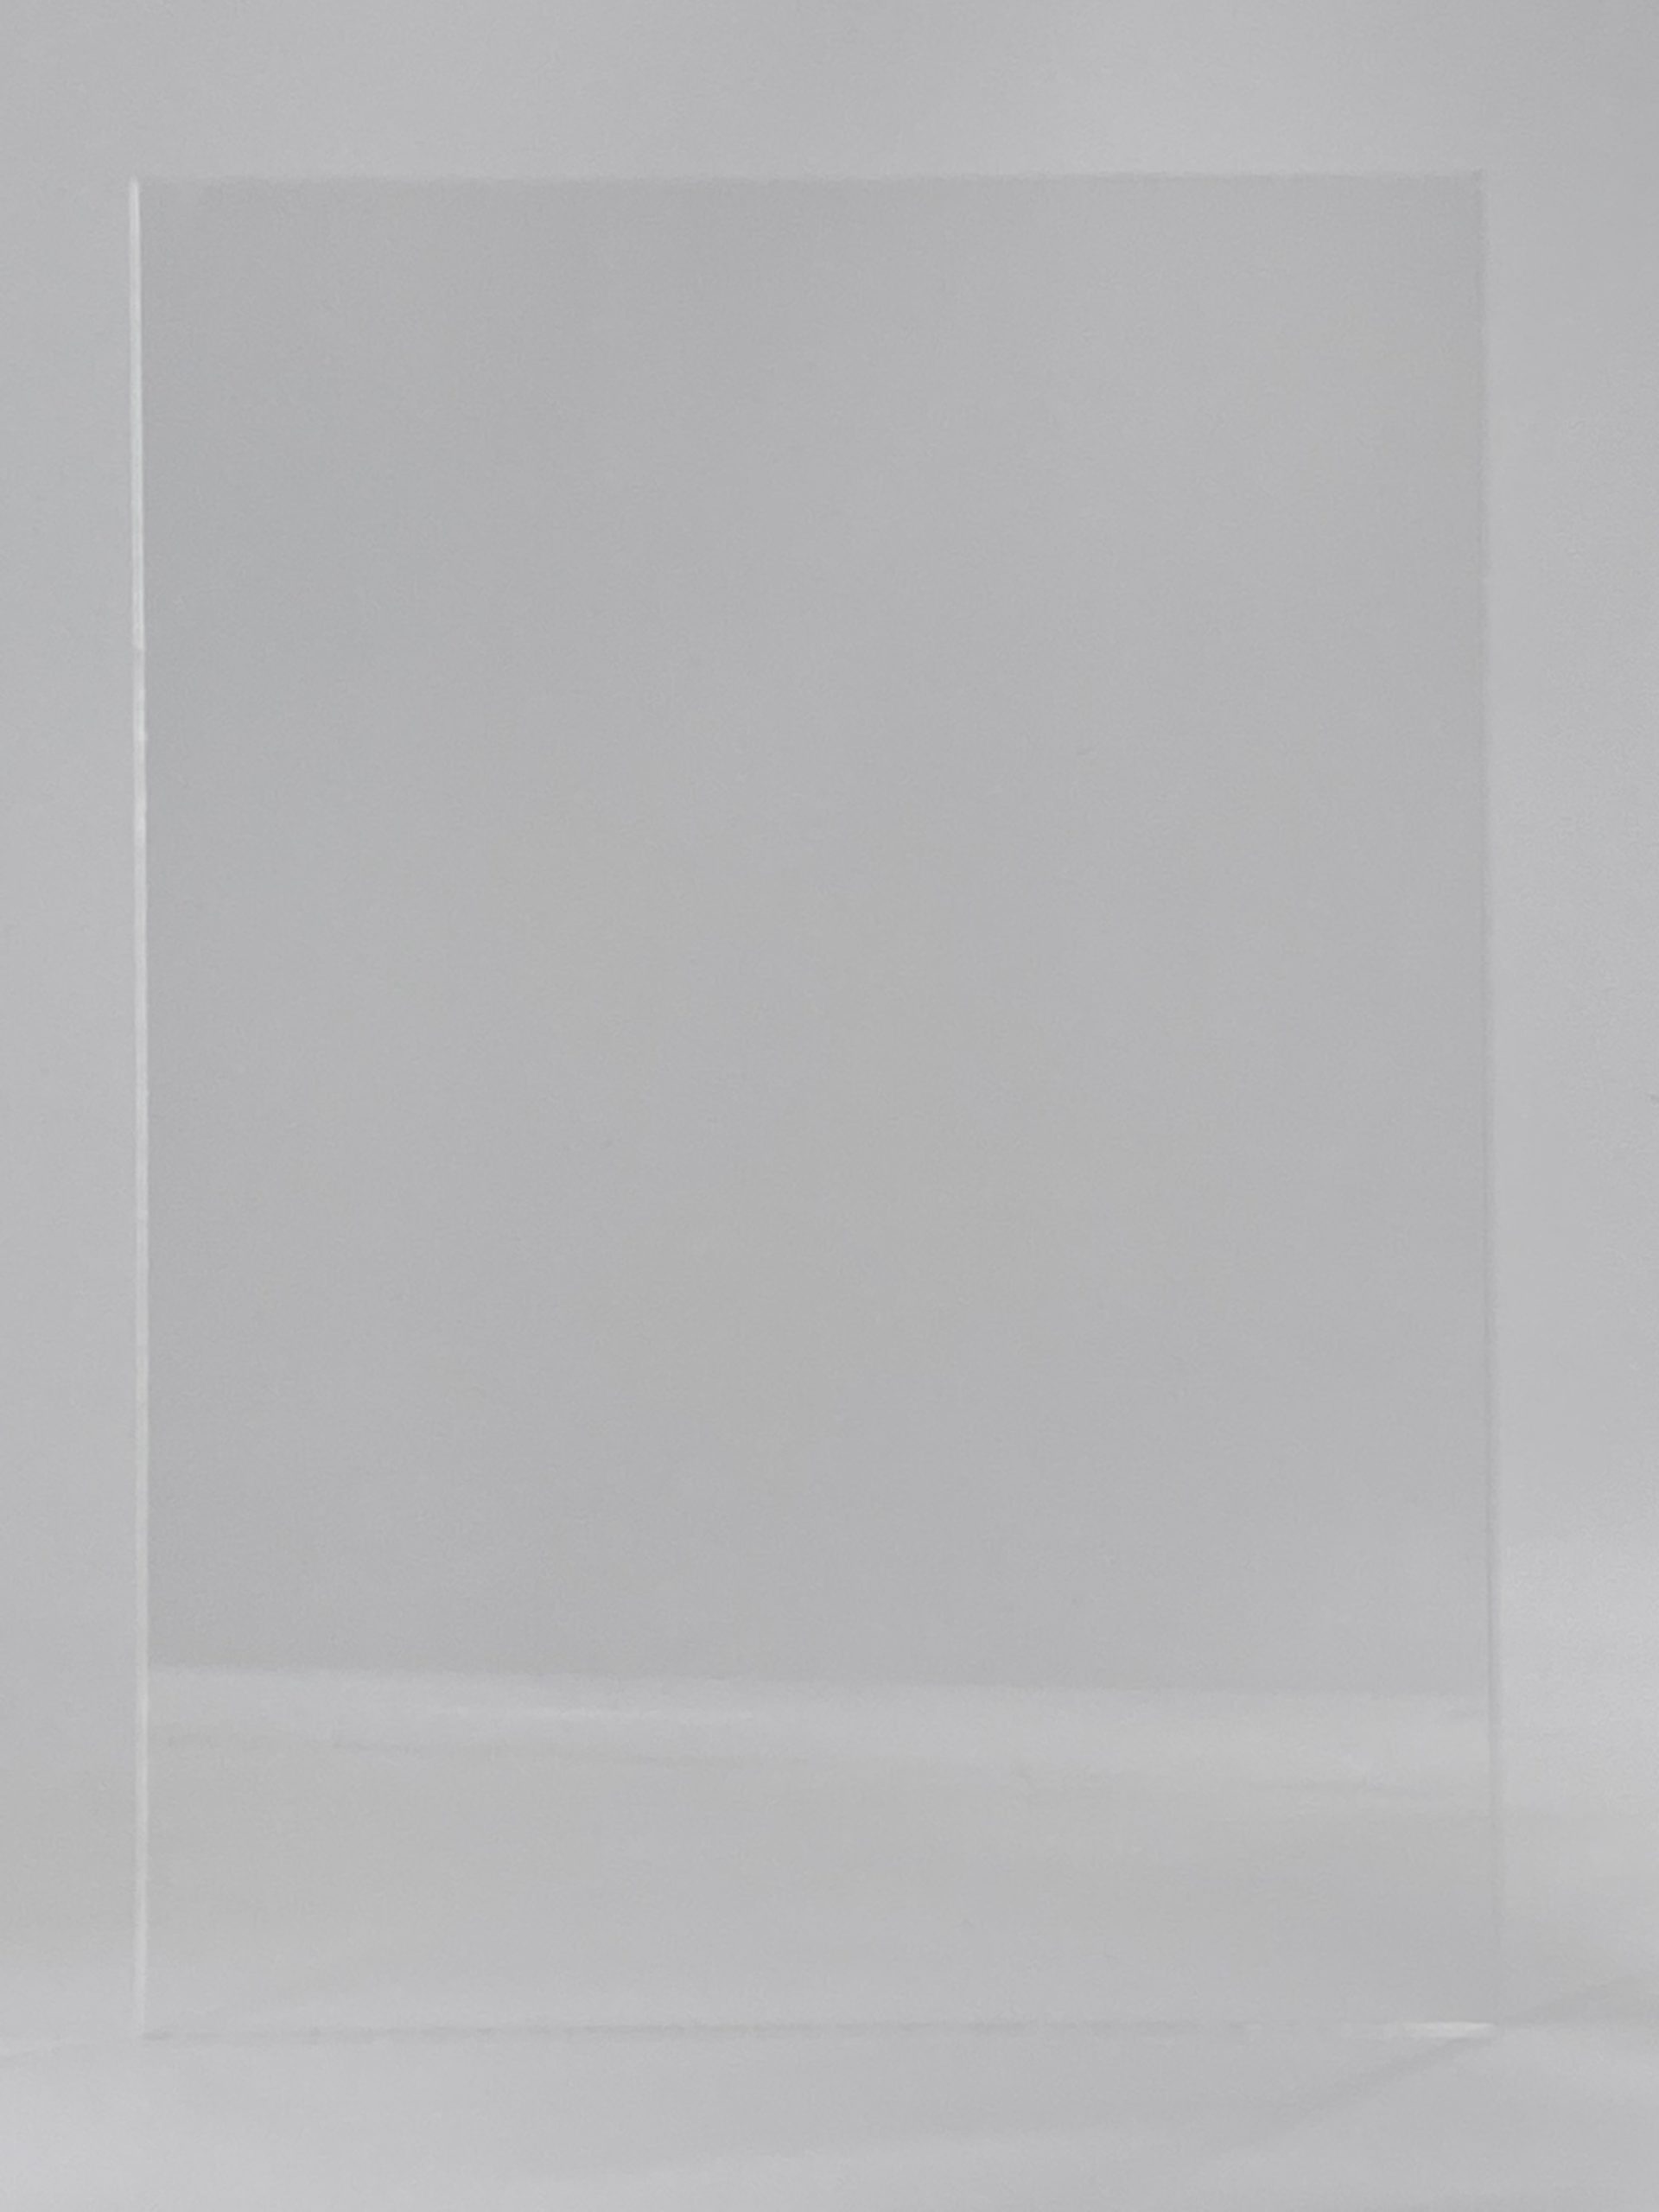 White Used in Art Installations Windows Cast Acrylic Sheet Aquariums Furniture 12 x 24 Trophies Display & Signage Models Lightweight & Easy to Fabricate Picture Frames 3mm Thick 